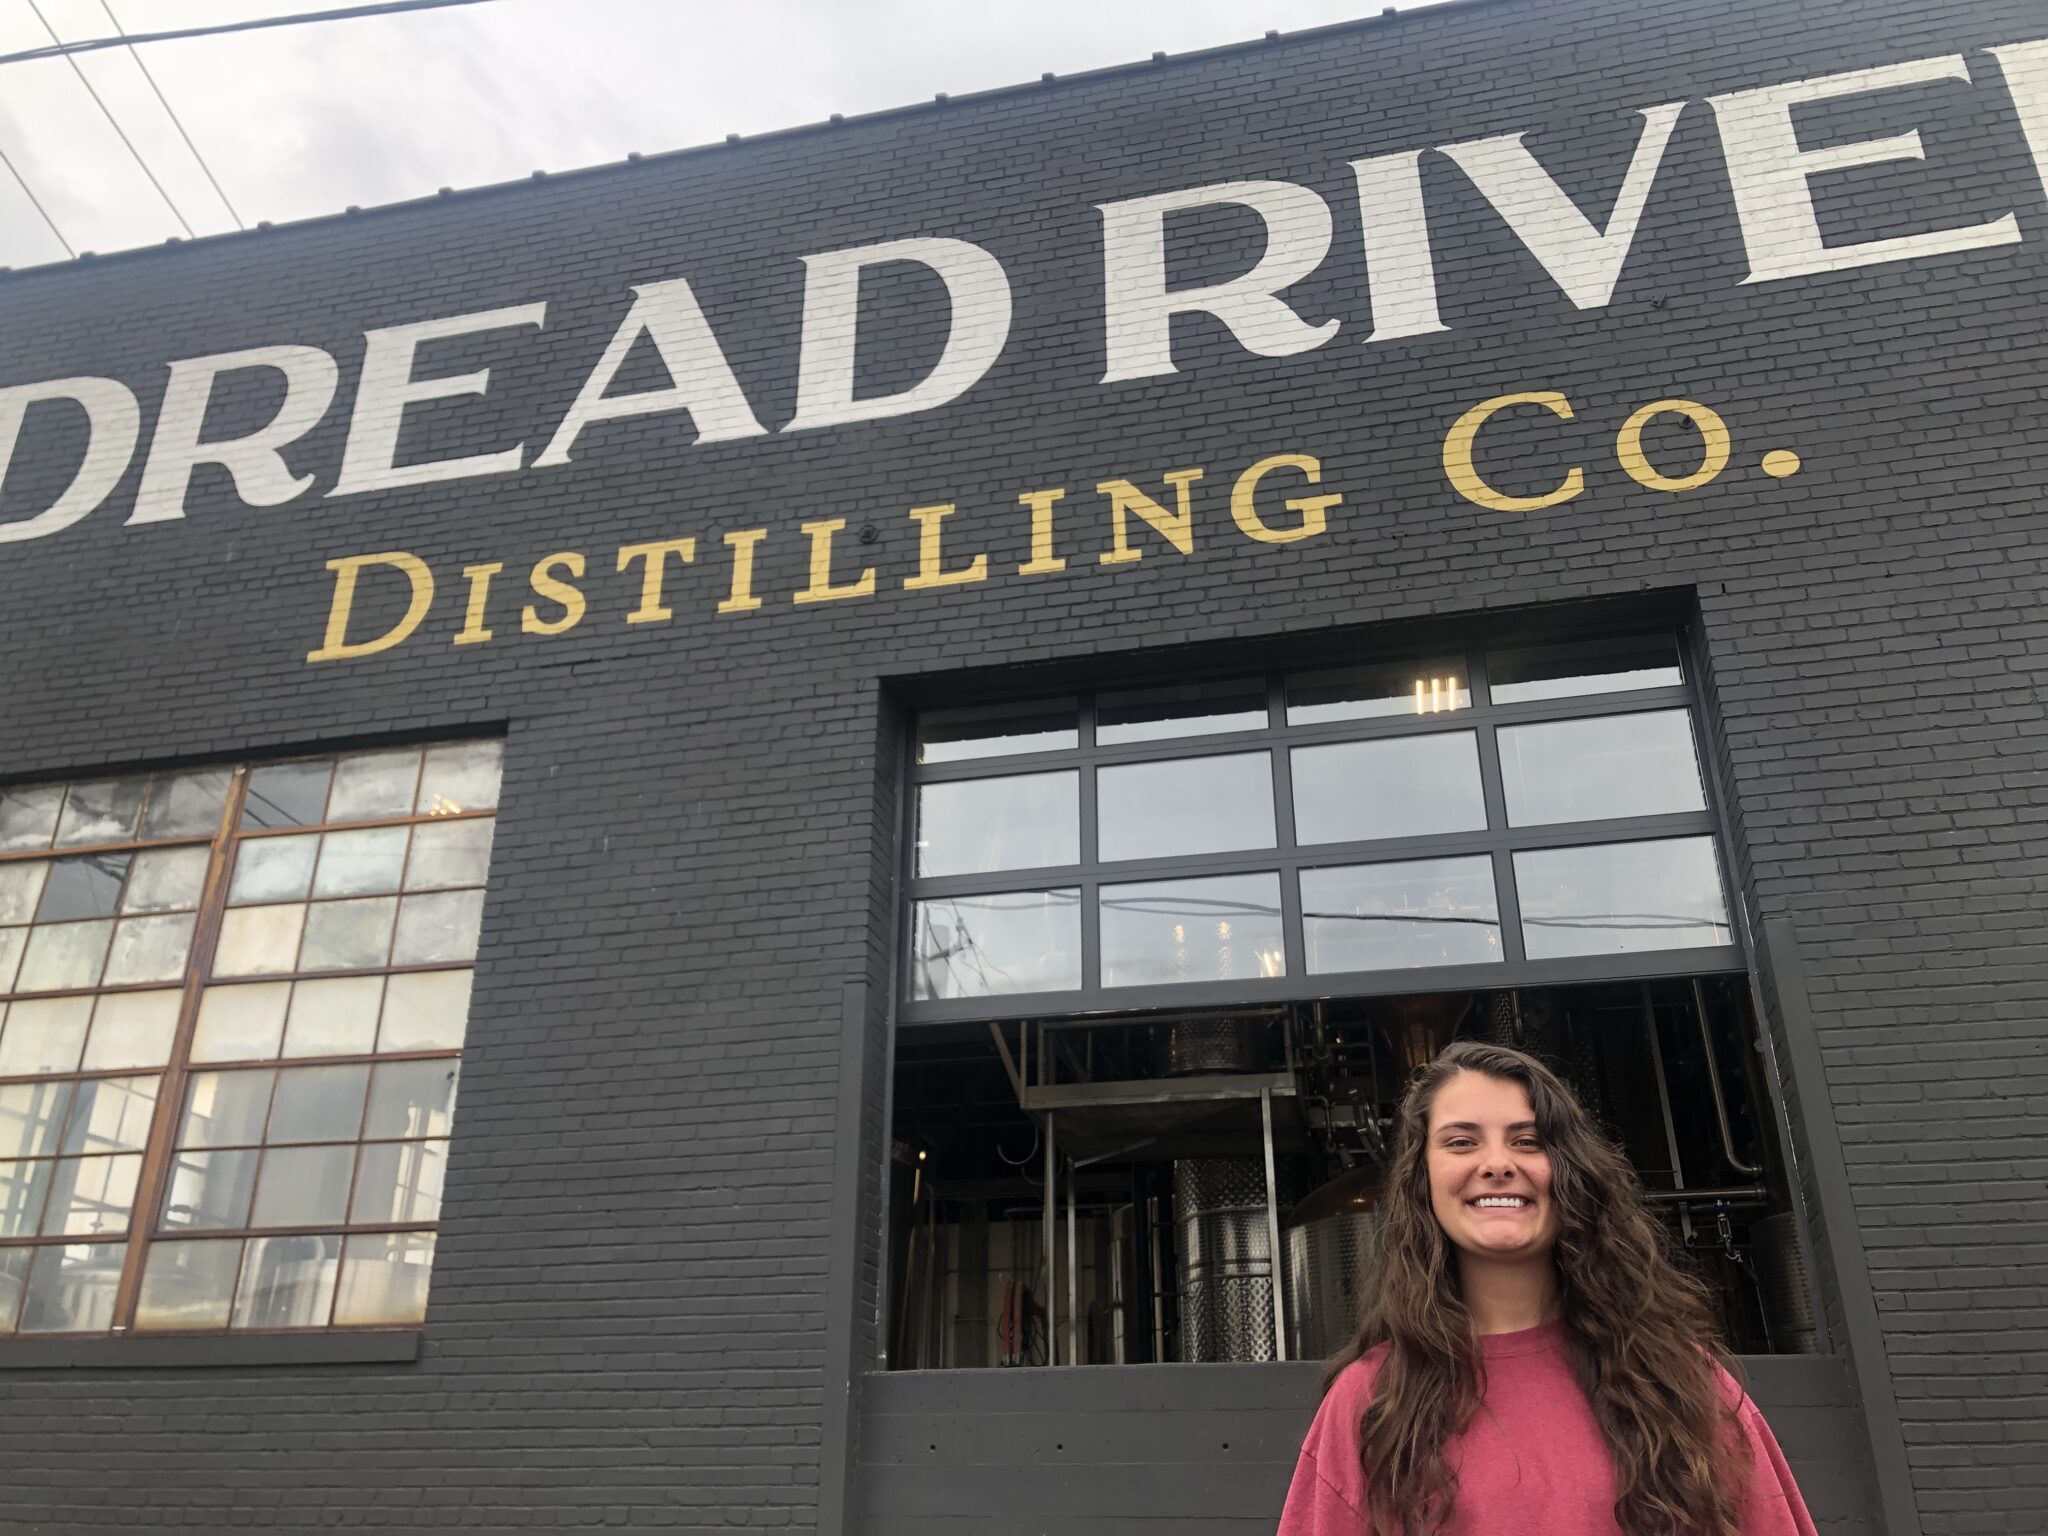 Skyler is a big fan of Dread River and all things bourbon. Photo via Pat Byington for Bham Now